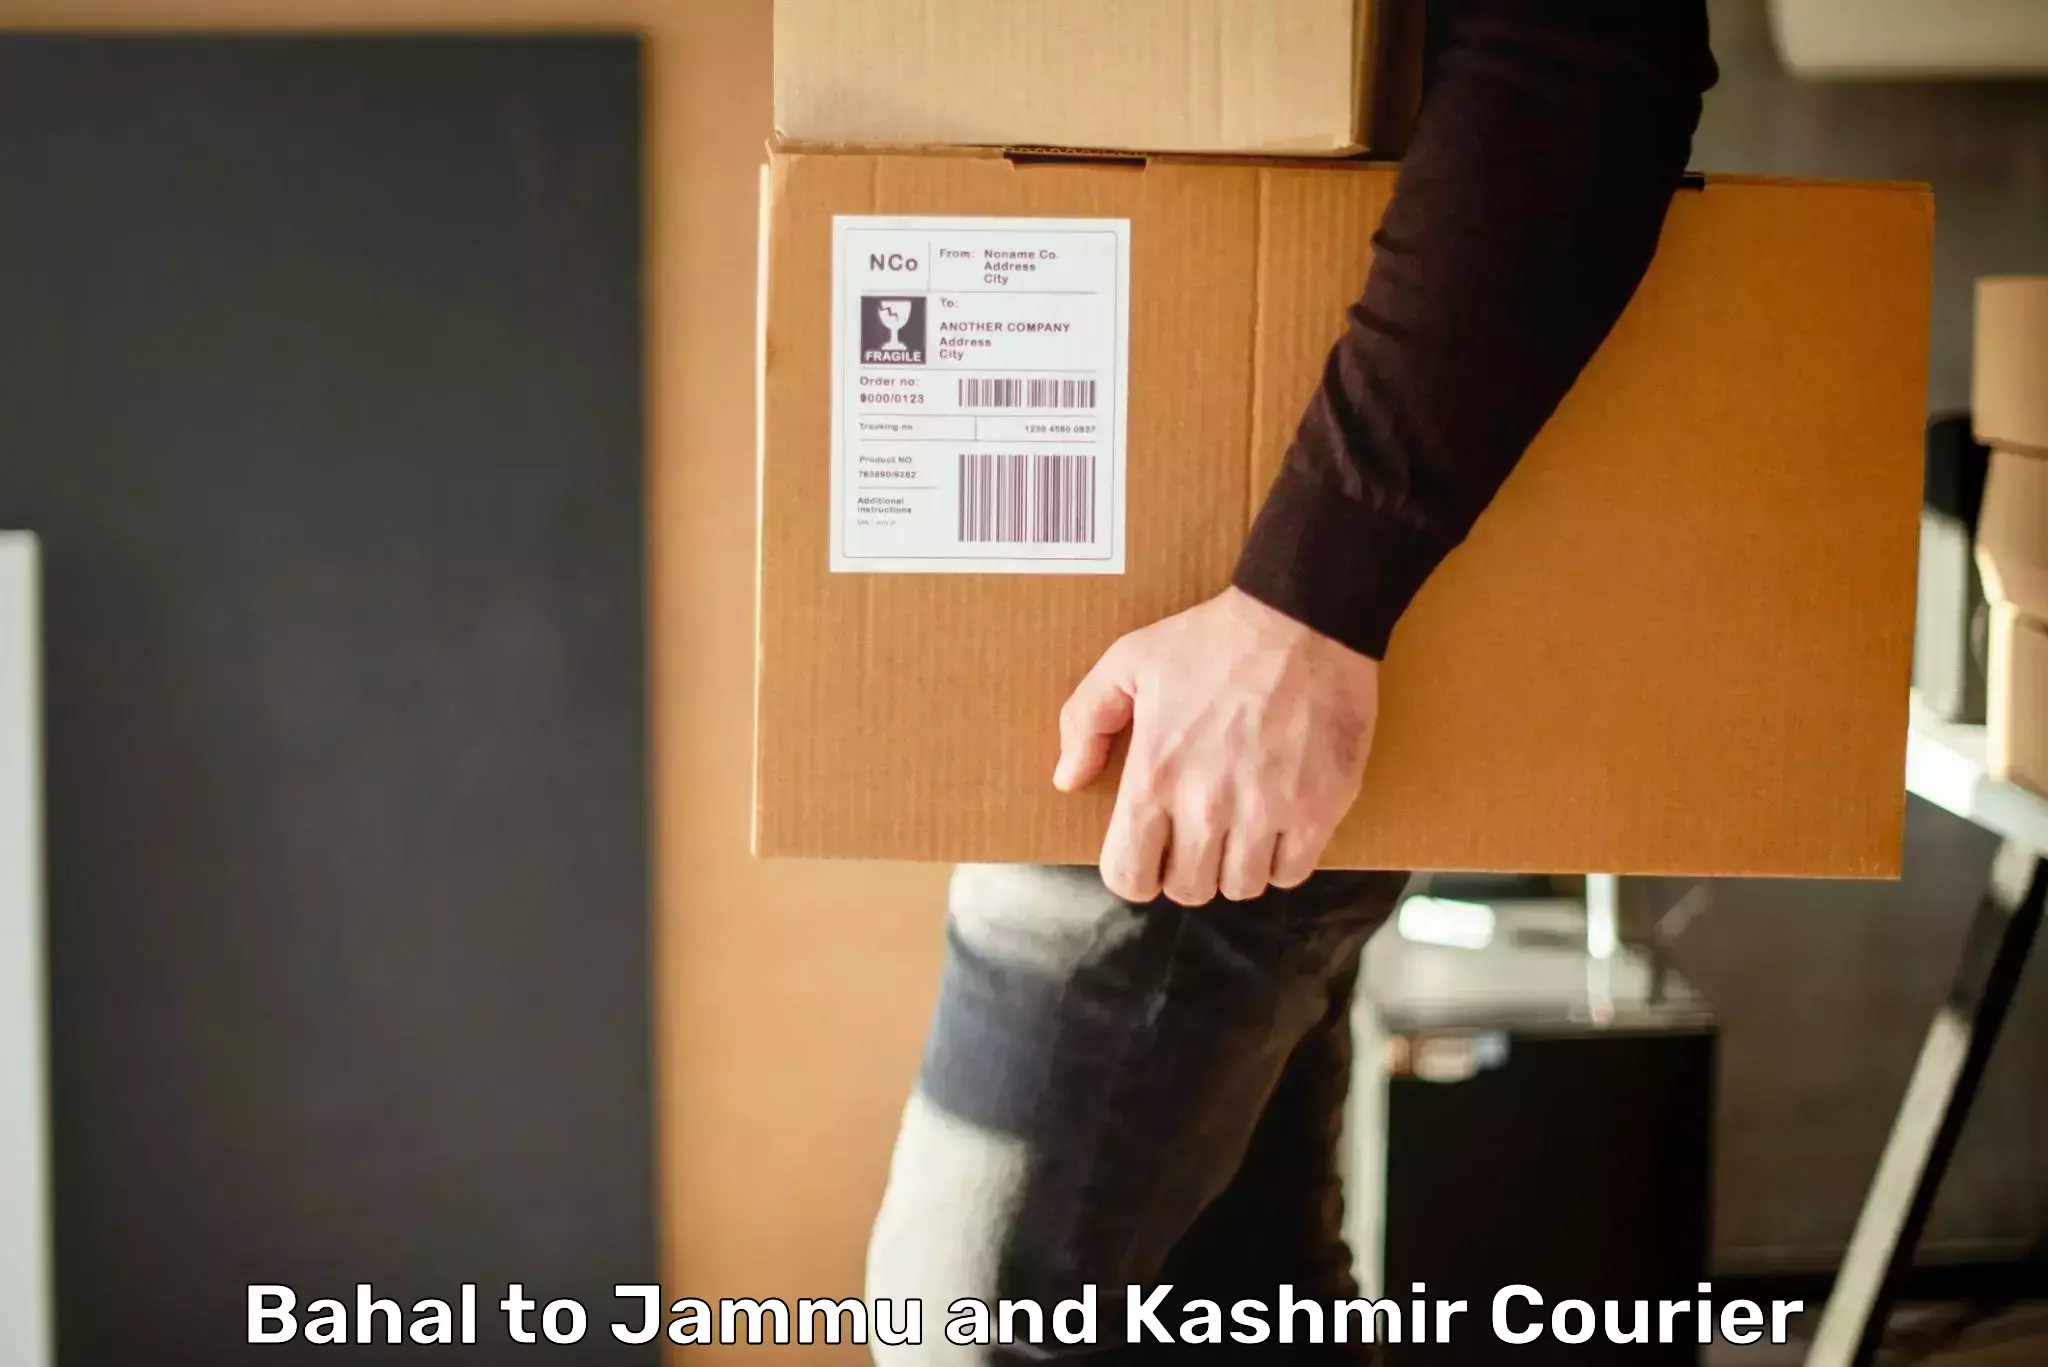 State-of-the-art courier technology Bahal to Pulwama